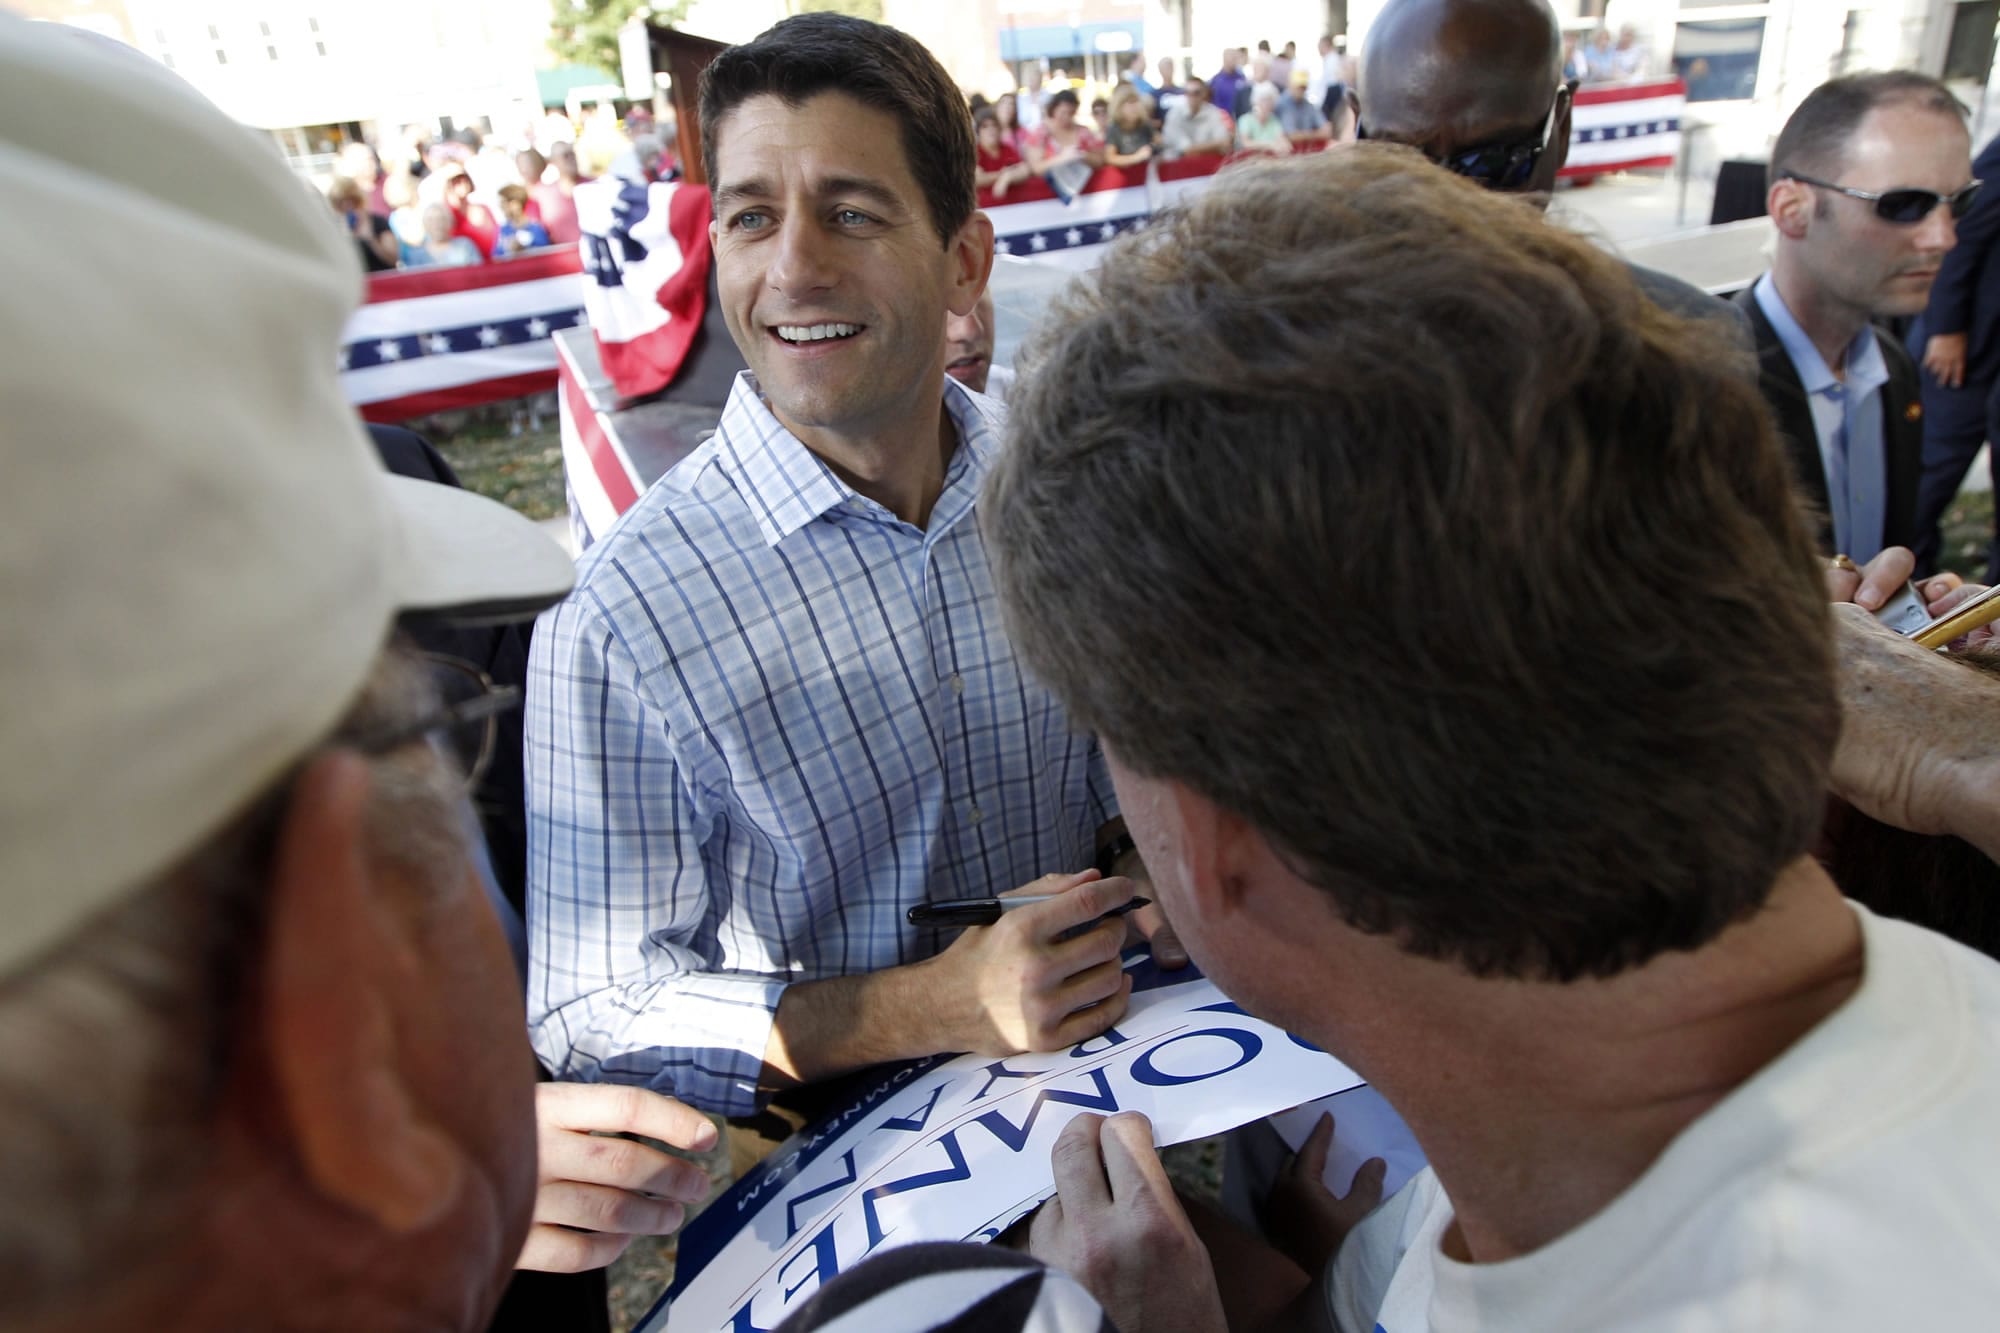 Republican vice presidential candidate, Rep. Paul Ryan, R-Wis. greets supporters during a campaign event on Wednesday in Adel, Iowa.